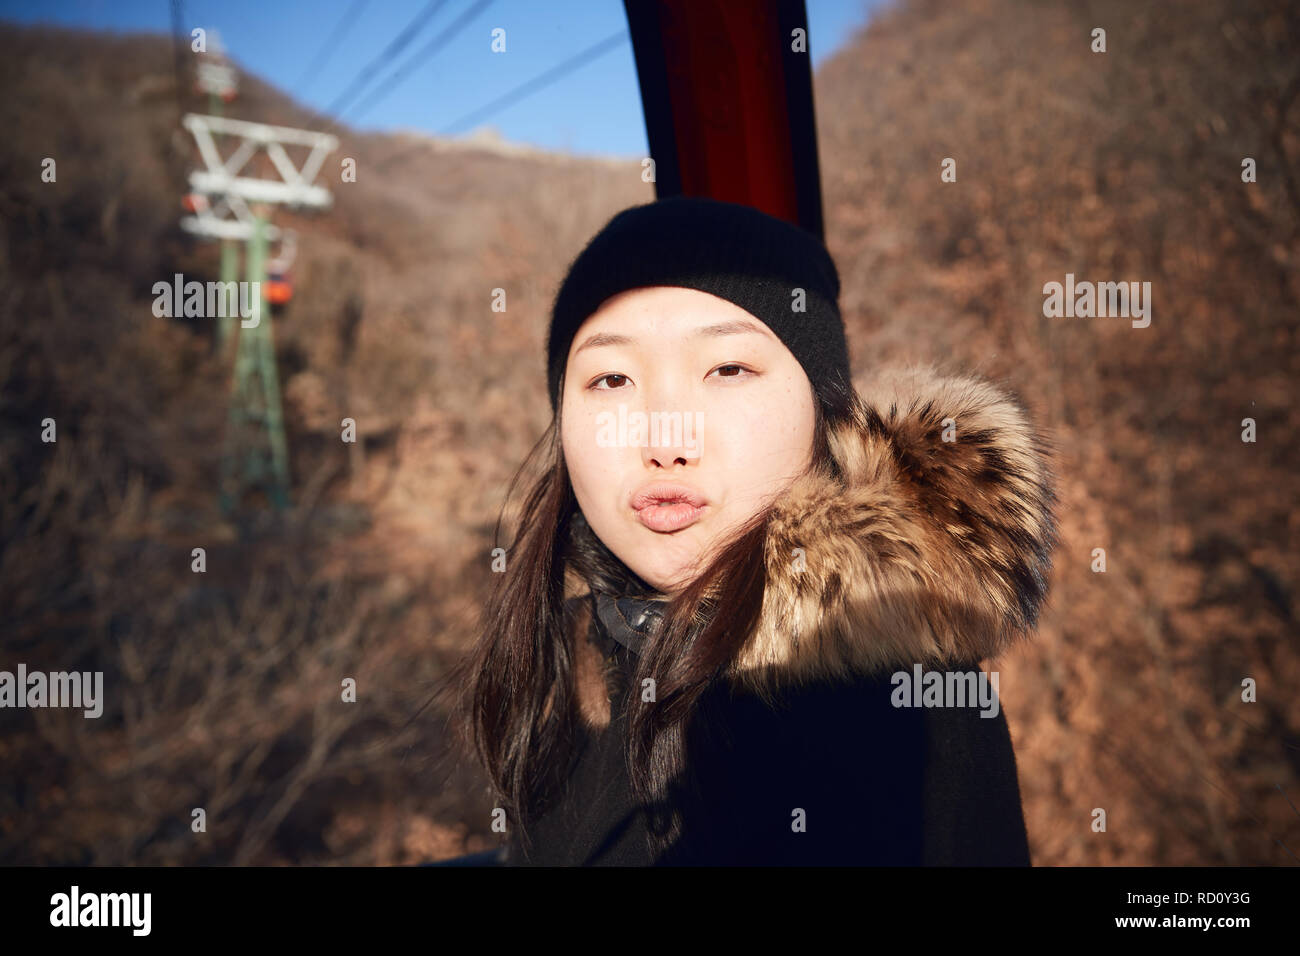 A young Chinese woman sitting inside a ski lift gondola wearing heavy winter clothing is blowing a kiss. Stock Photo